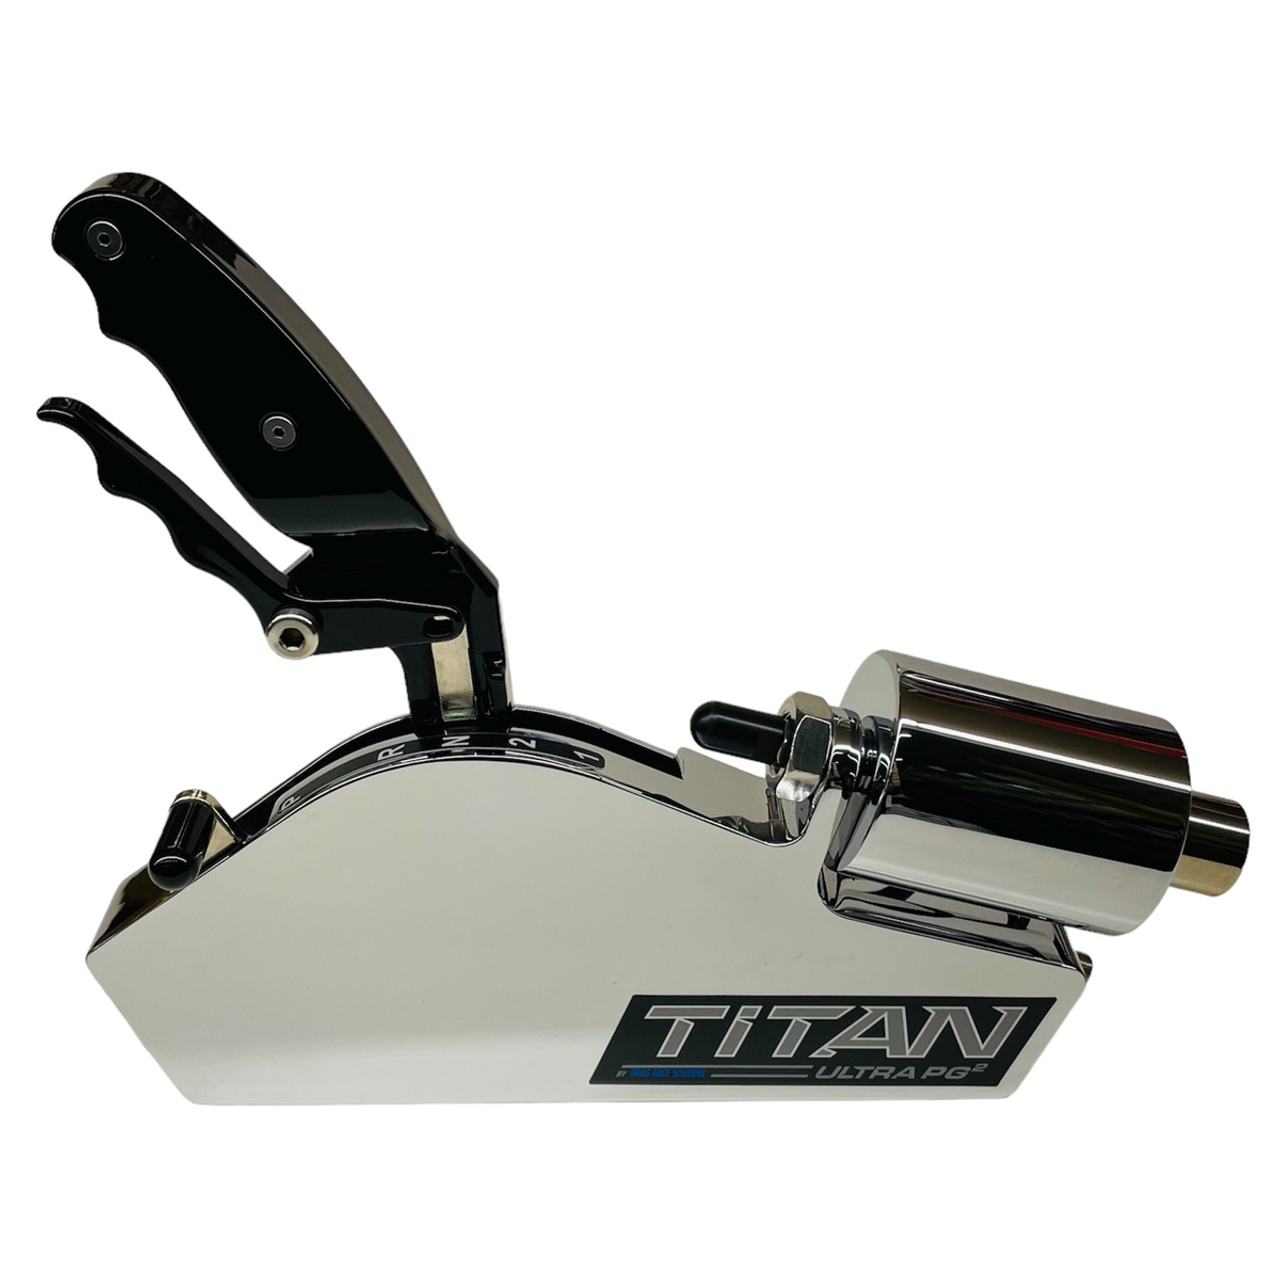 Titan Ultra PG2 Powerglide Shifter - Chrome - 11ft Electric